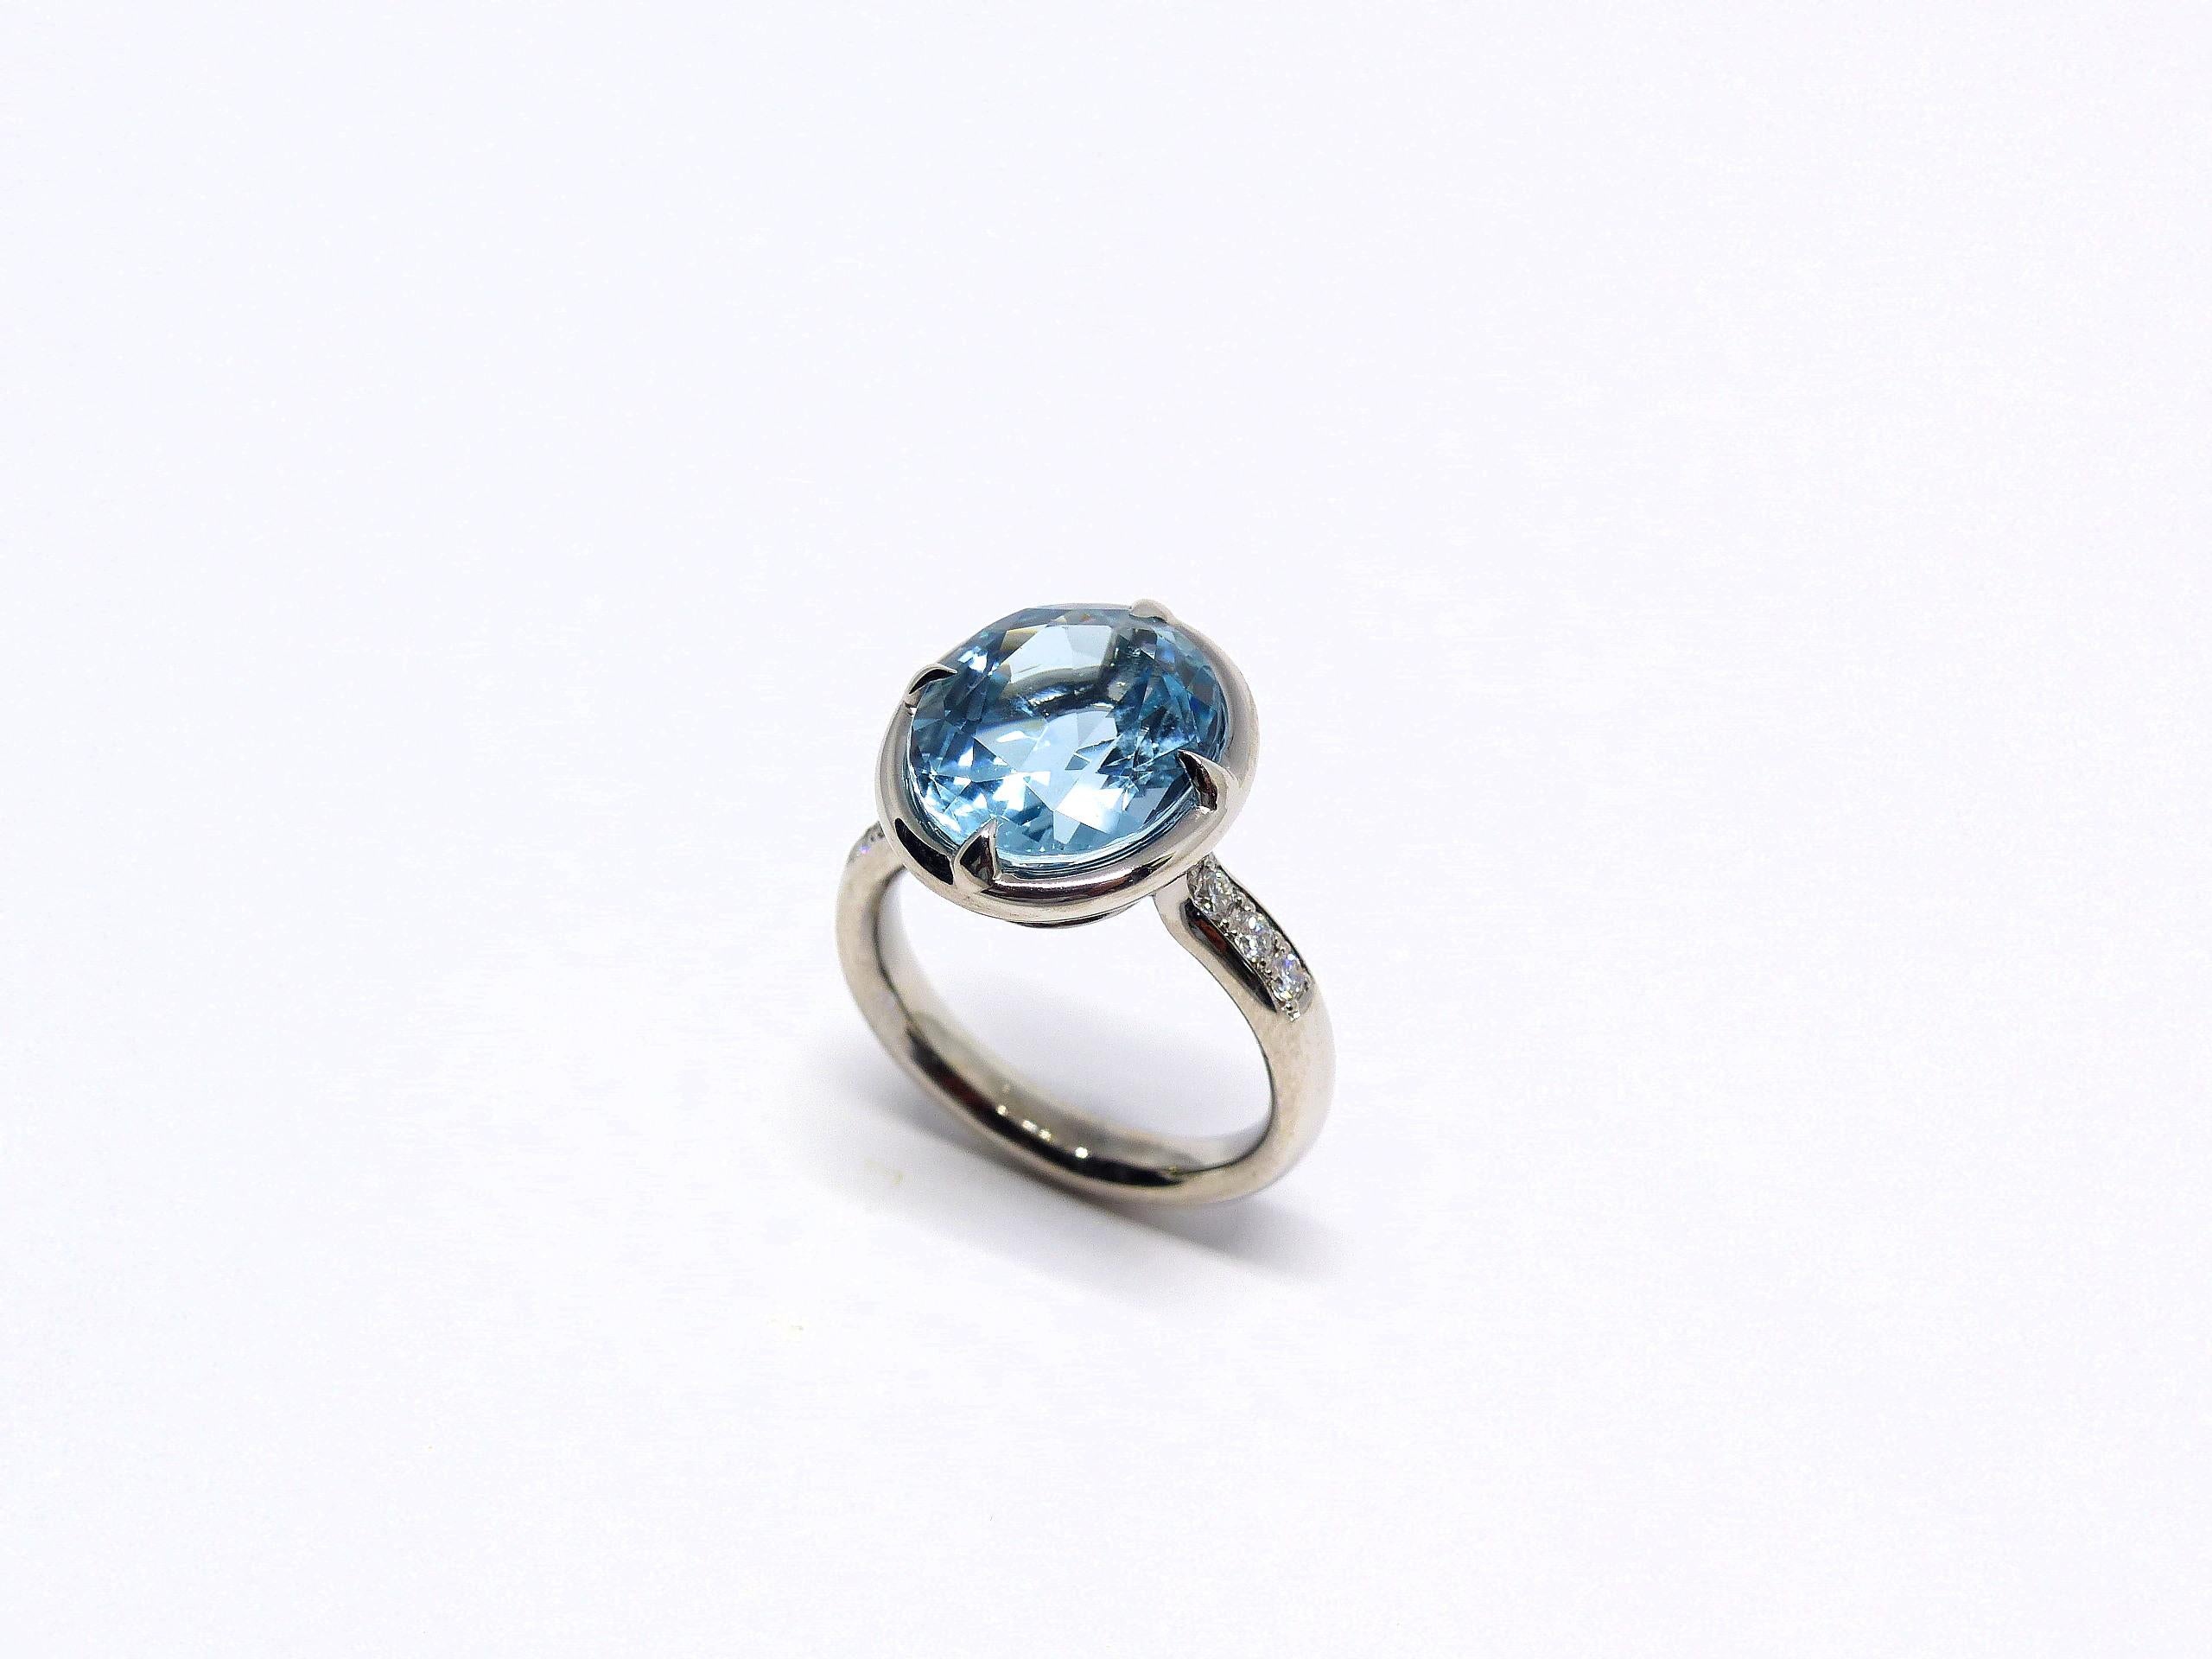 Oval Cut LEYSER 18k White Gold Ring with 1 Aquamarine (oval, 13x11mm) and Diamonds For Sale